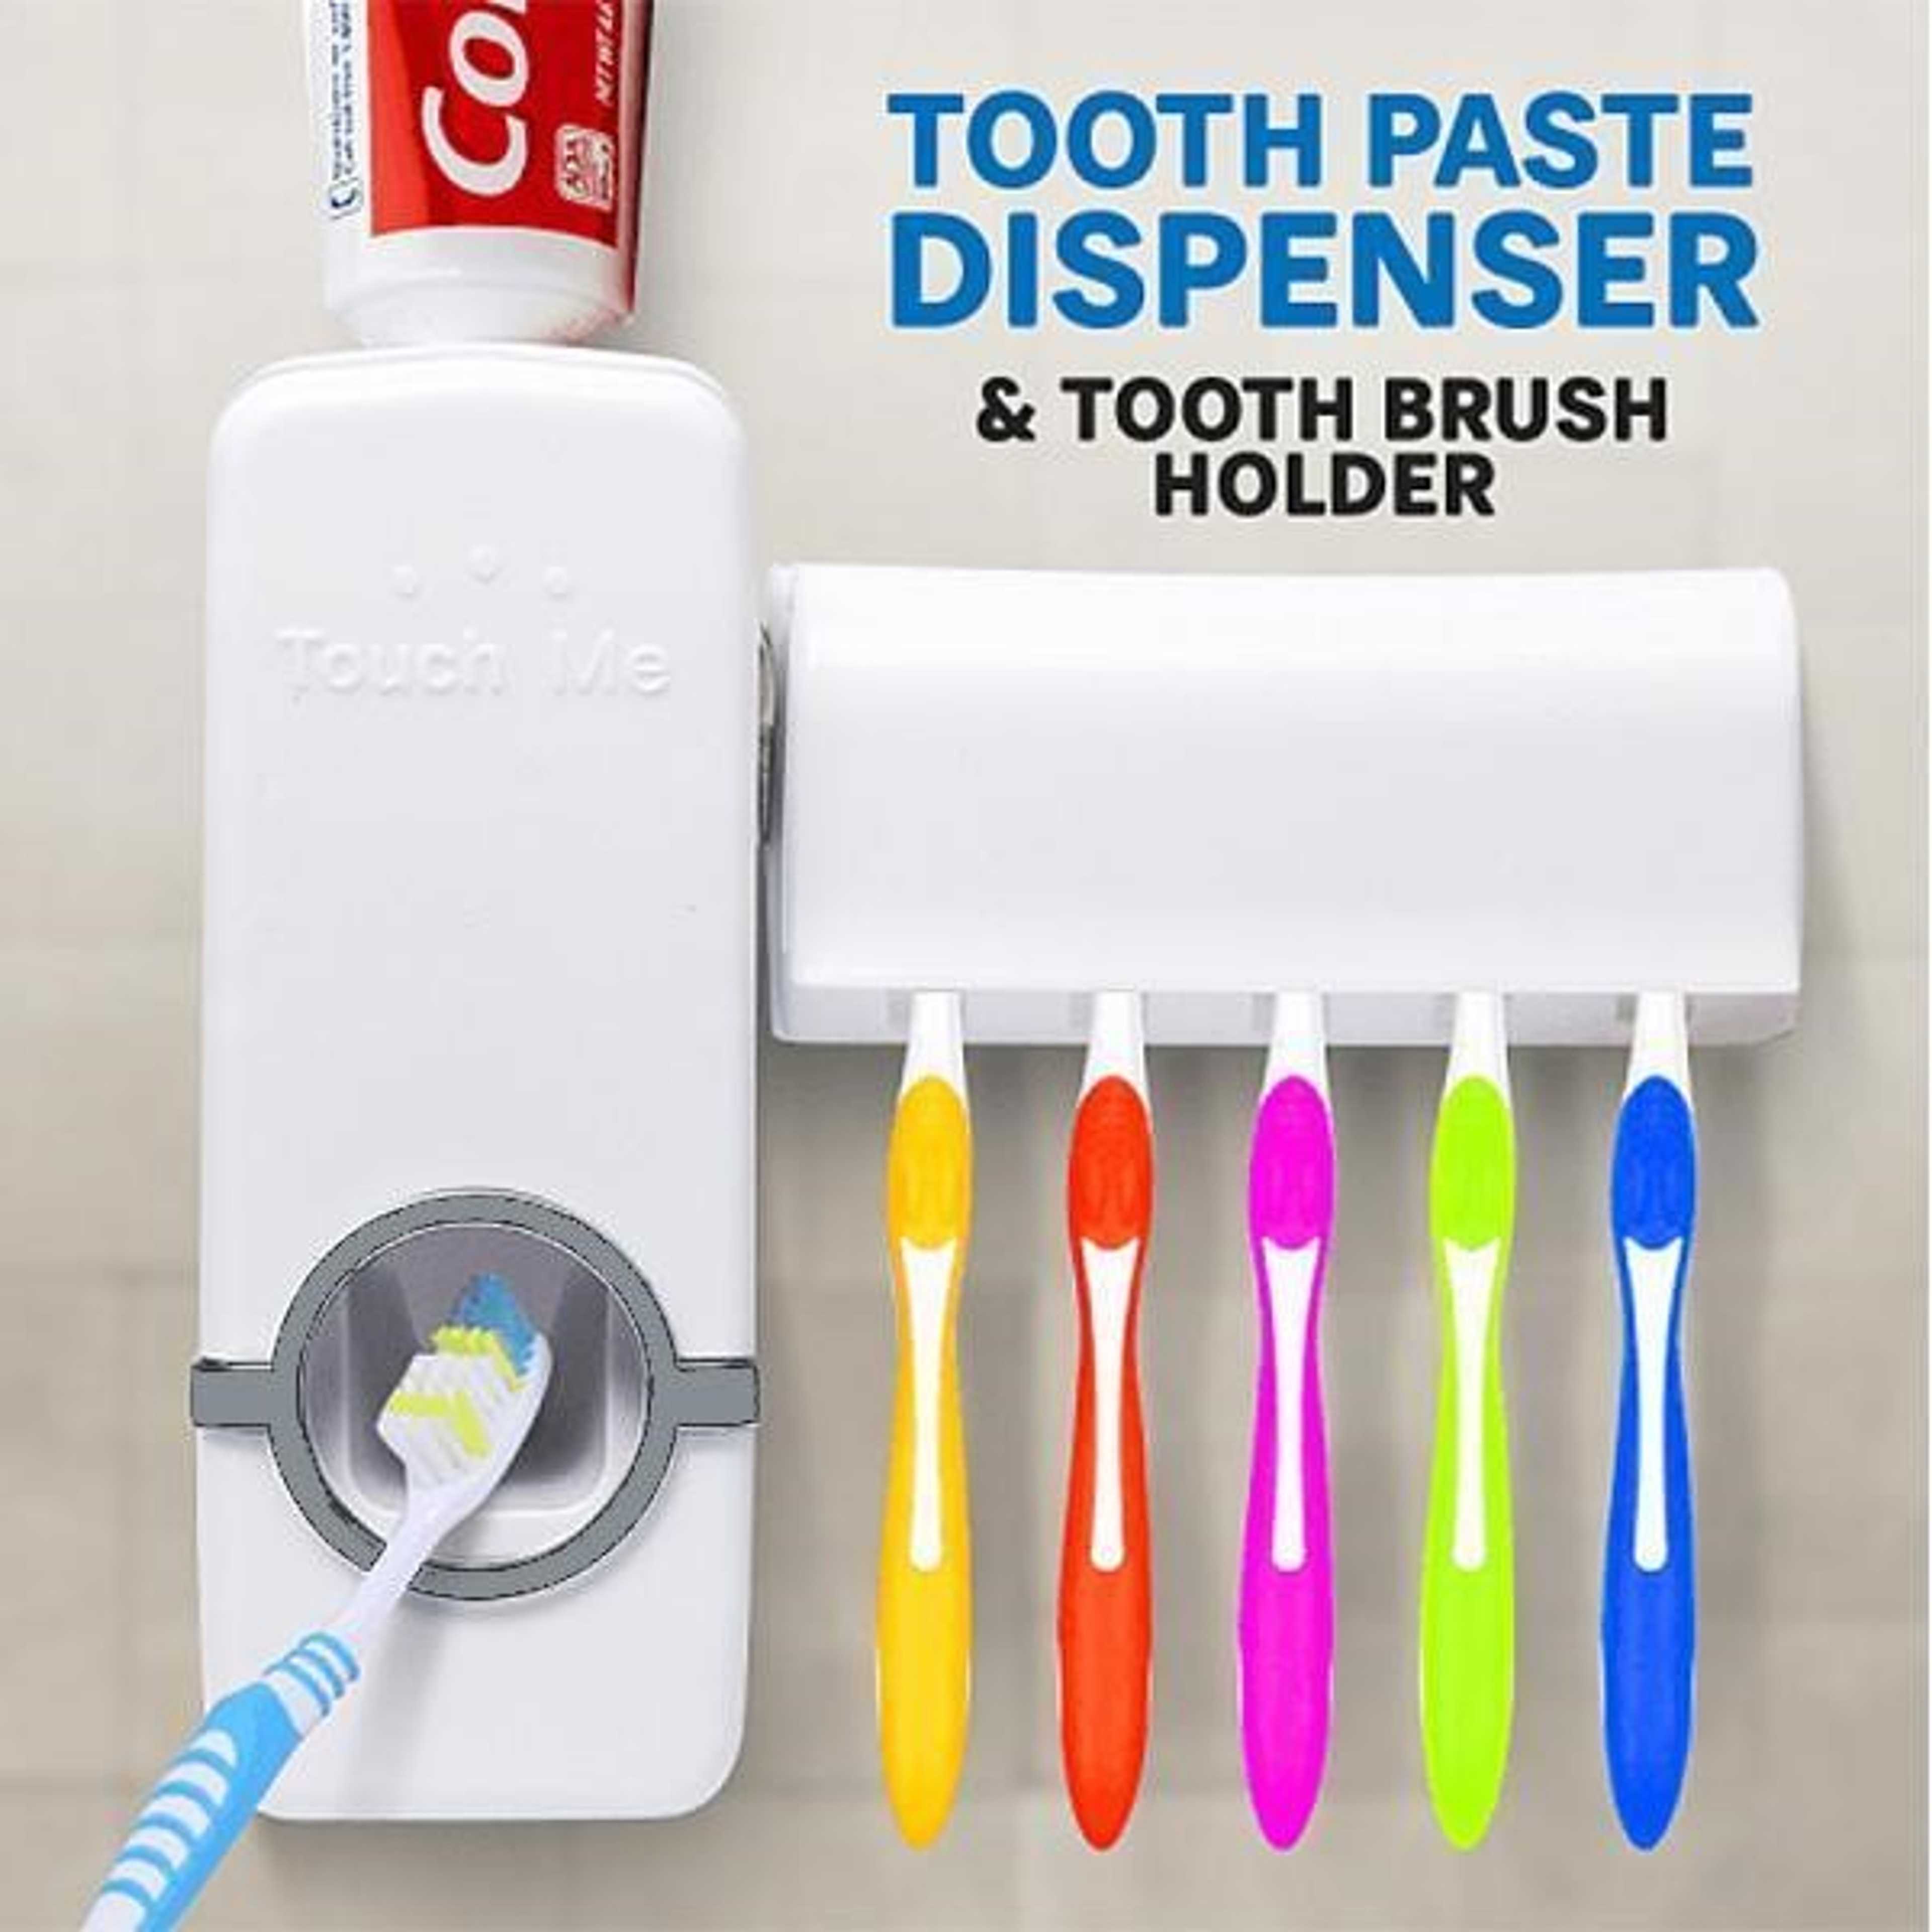 Best Quality Set of Toothpaste Dispenser & Brush Holder - White [High Quality] Toothpaste Dispenser and tooth brush holder Toothpaste Dispenser automatic For Homes And Bathrooms white Automatic Toothpaste Dispenser & Toothbrush Holder - Multi-Functional